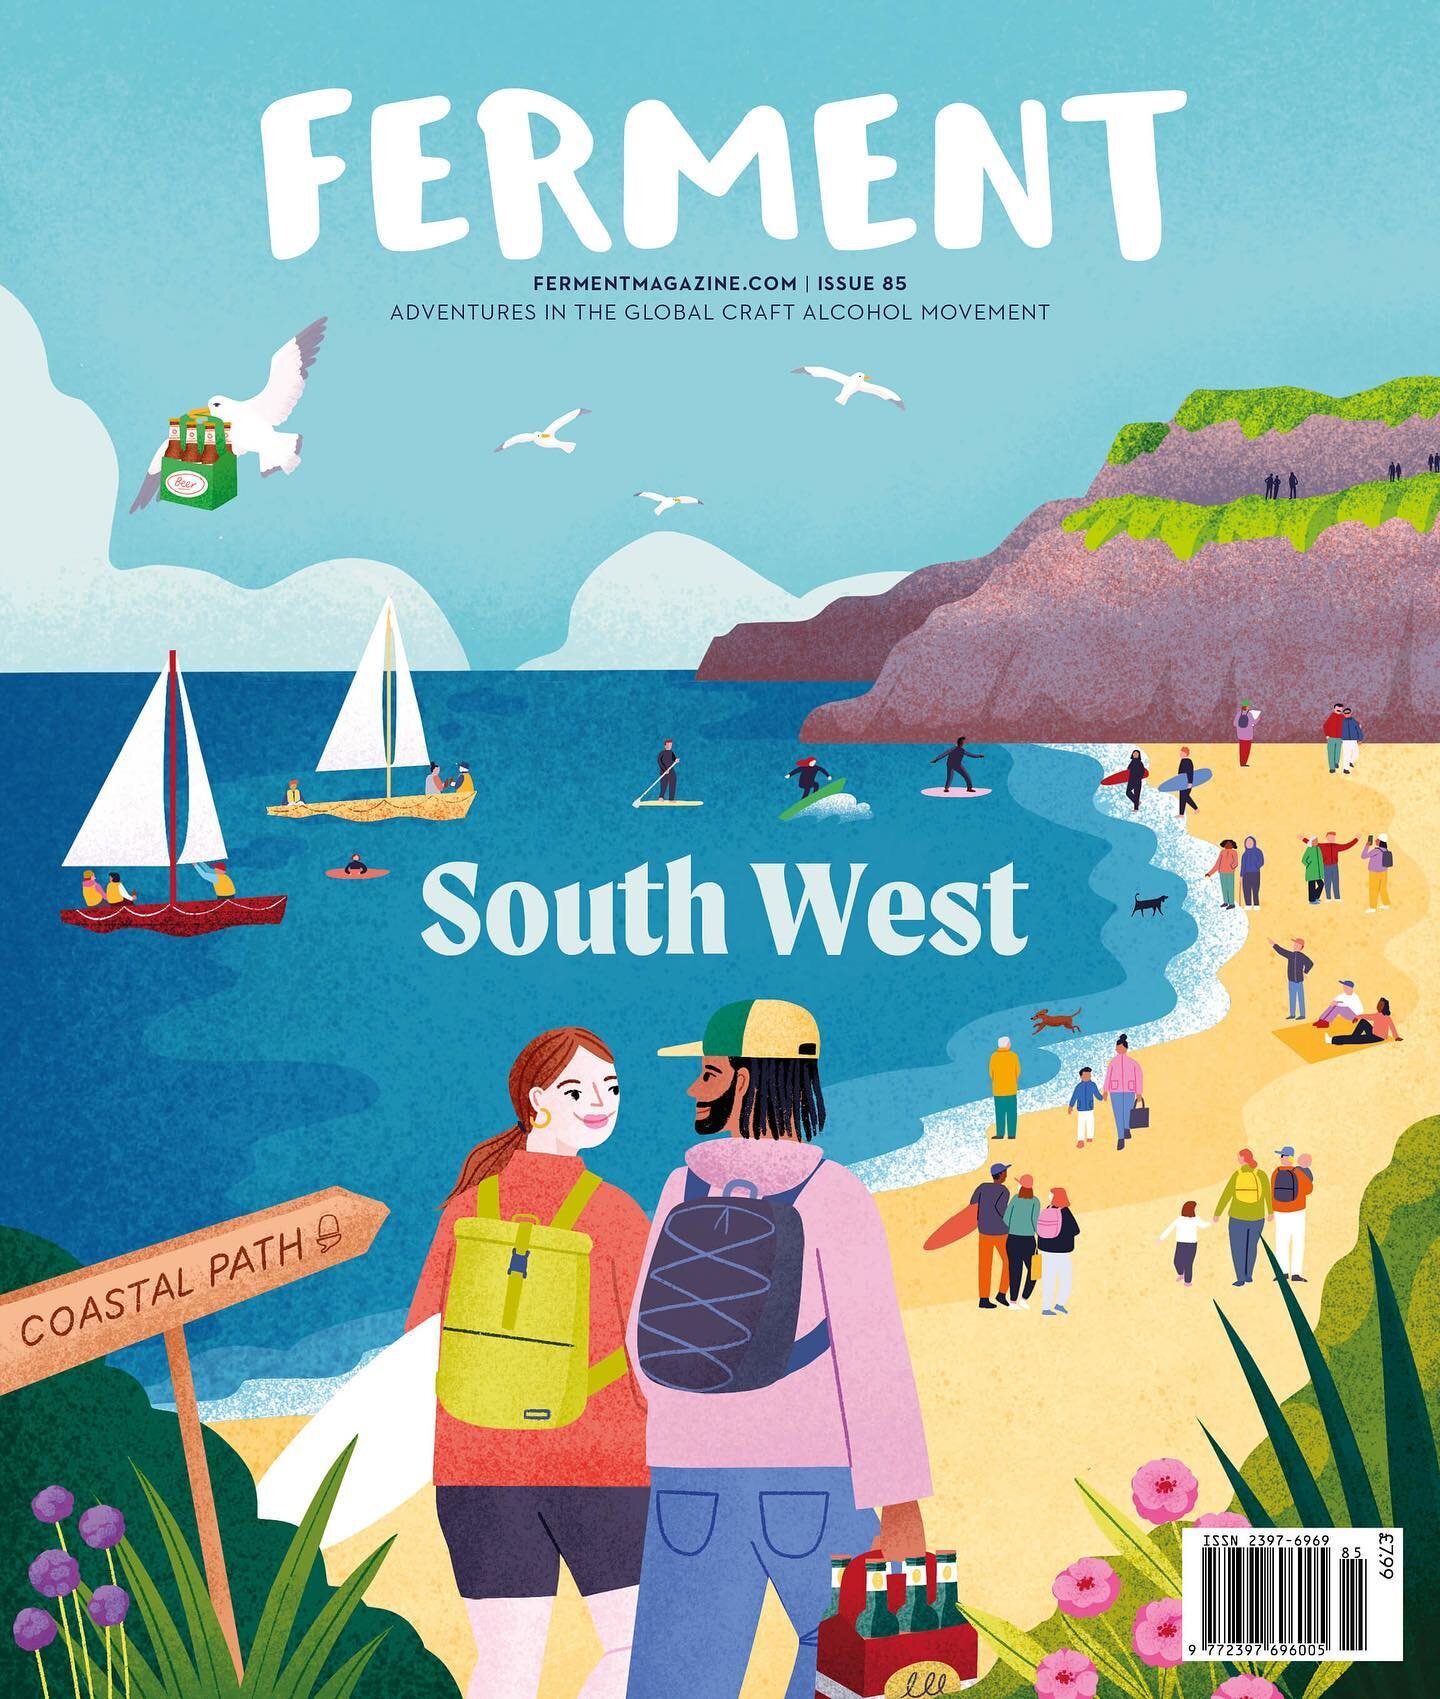 ⁣New work for the South West issue of @fermentmagazine out now! ⠀
.⠀
.⠀
.⠀
.⠀
.⠀
#illustration #fermentmagazine #magazinecover #southwest #coast #coastalillustration #surf #surfing #craftbeer #beer52 #beachwalk